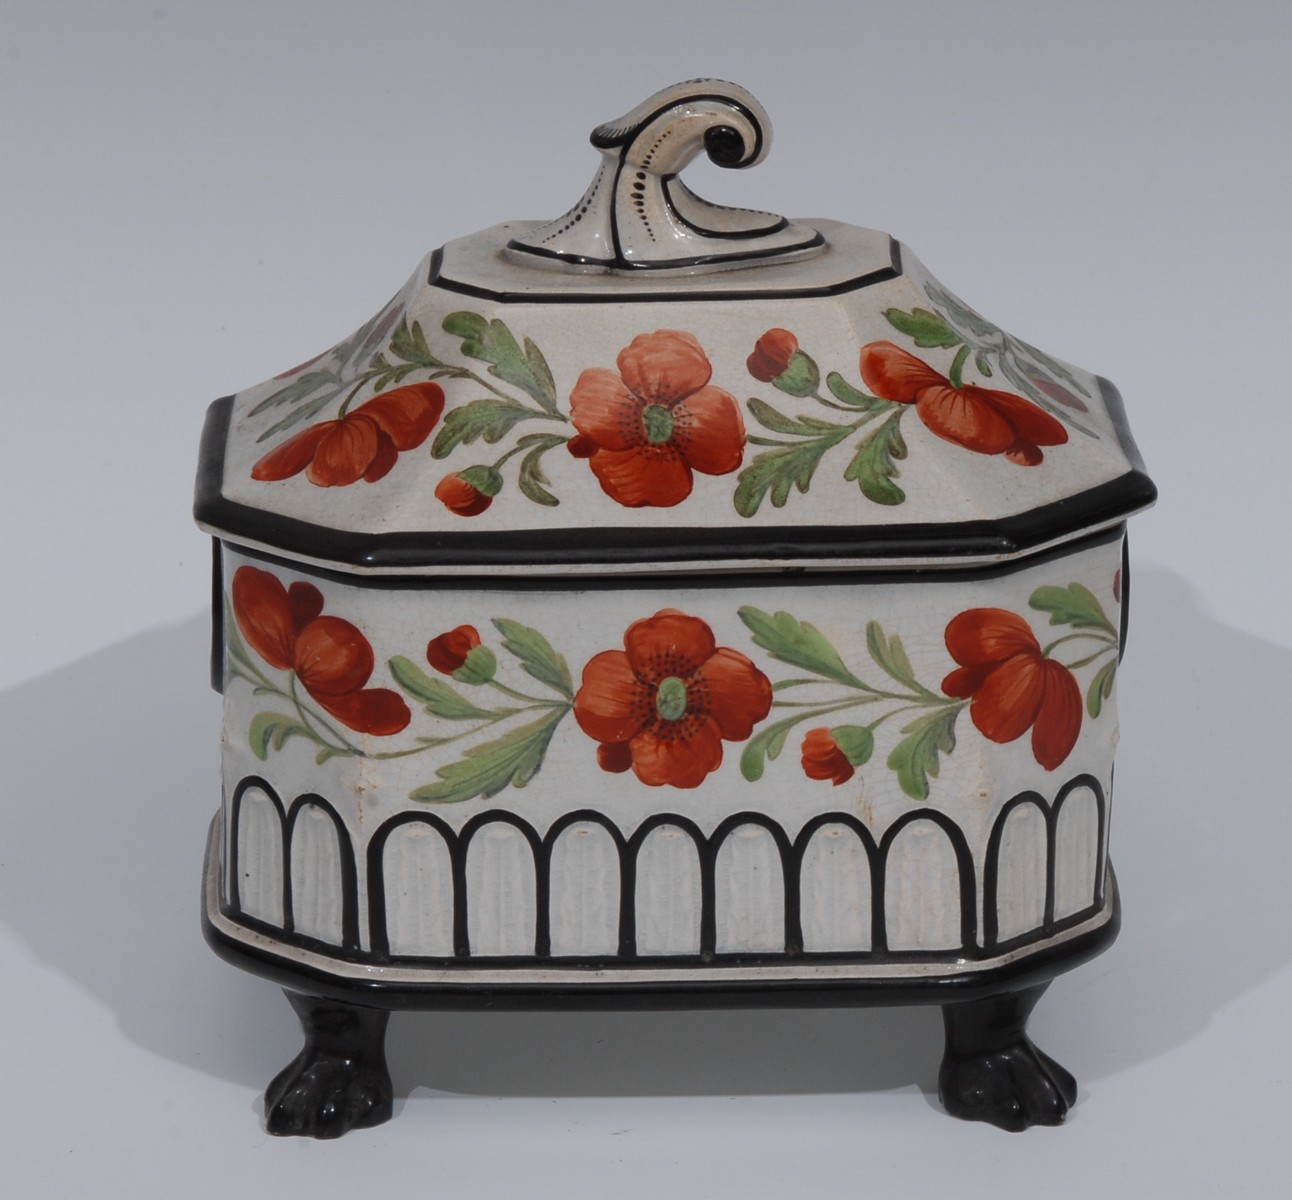 A Prattware creamware canted rectangular casket, paitned iwht poppies, in red and green,